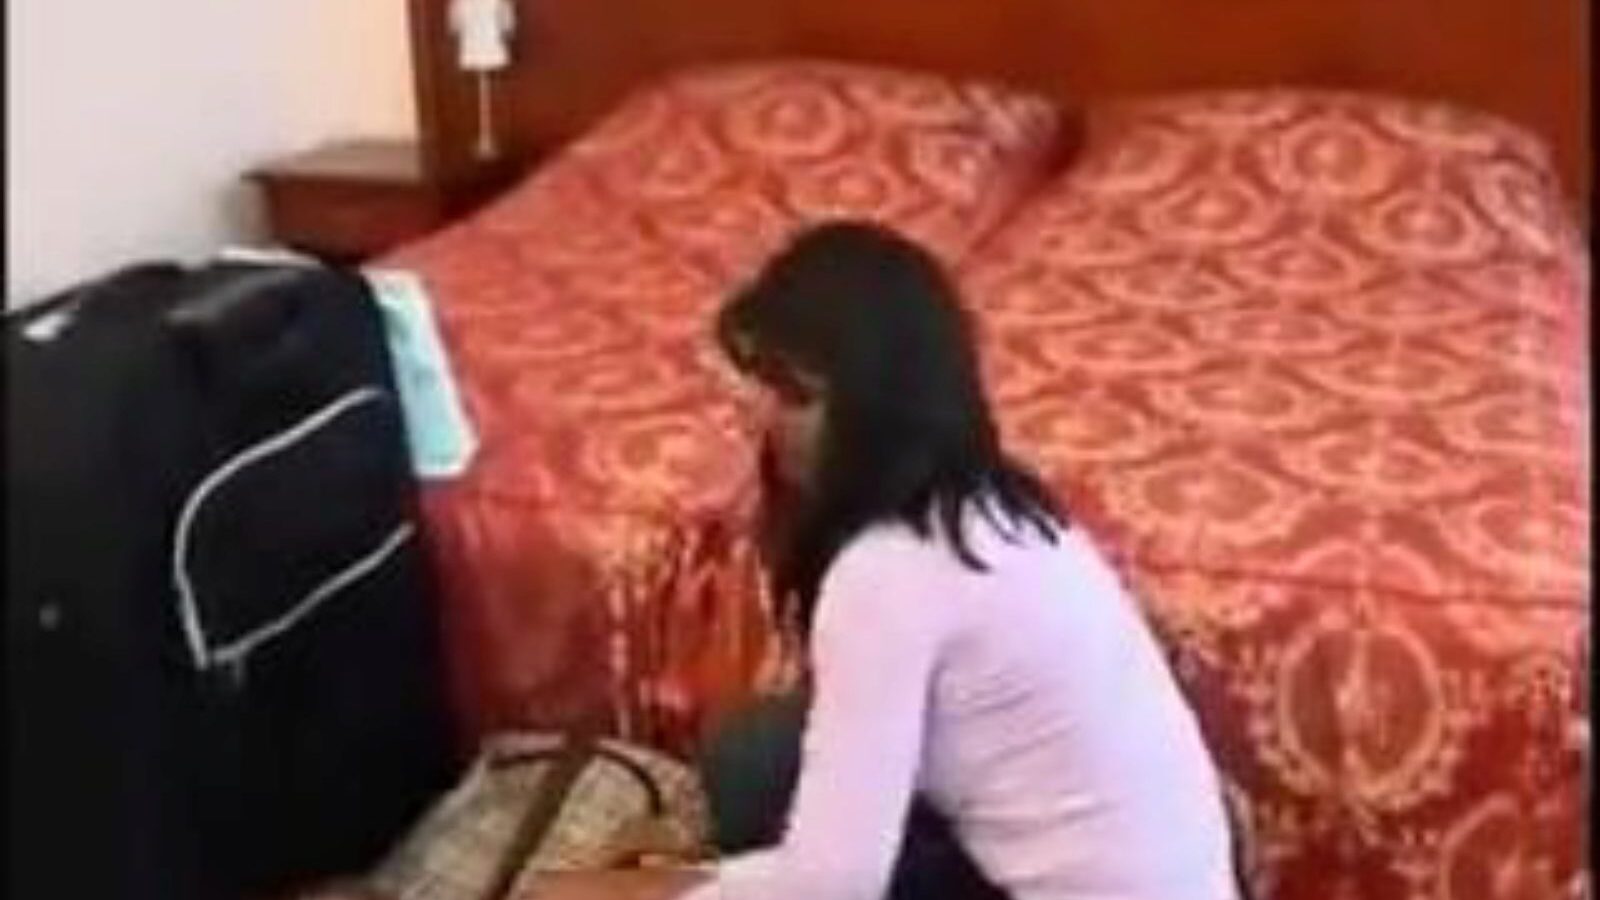 Indian Cutie Fuckt in Hotel, Free Indian Tube Pornhub Porn Movie See Indian Cutie Fuckt in Hotel movie on xHamster, the massive hook-up tube web resource with tons of free-for-all Indian Tube Pornhub & Indian Beeg pornography movie scenes